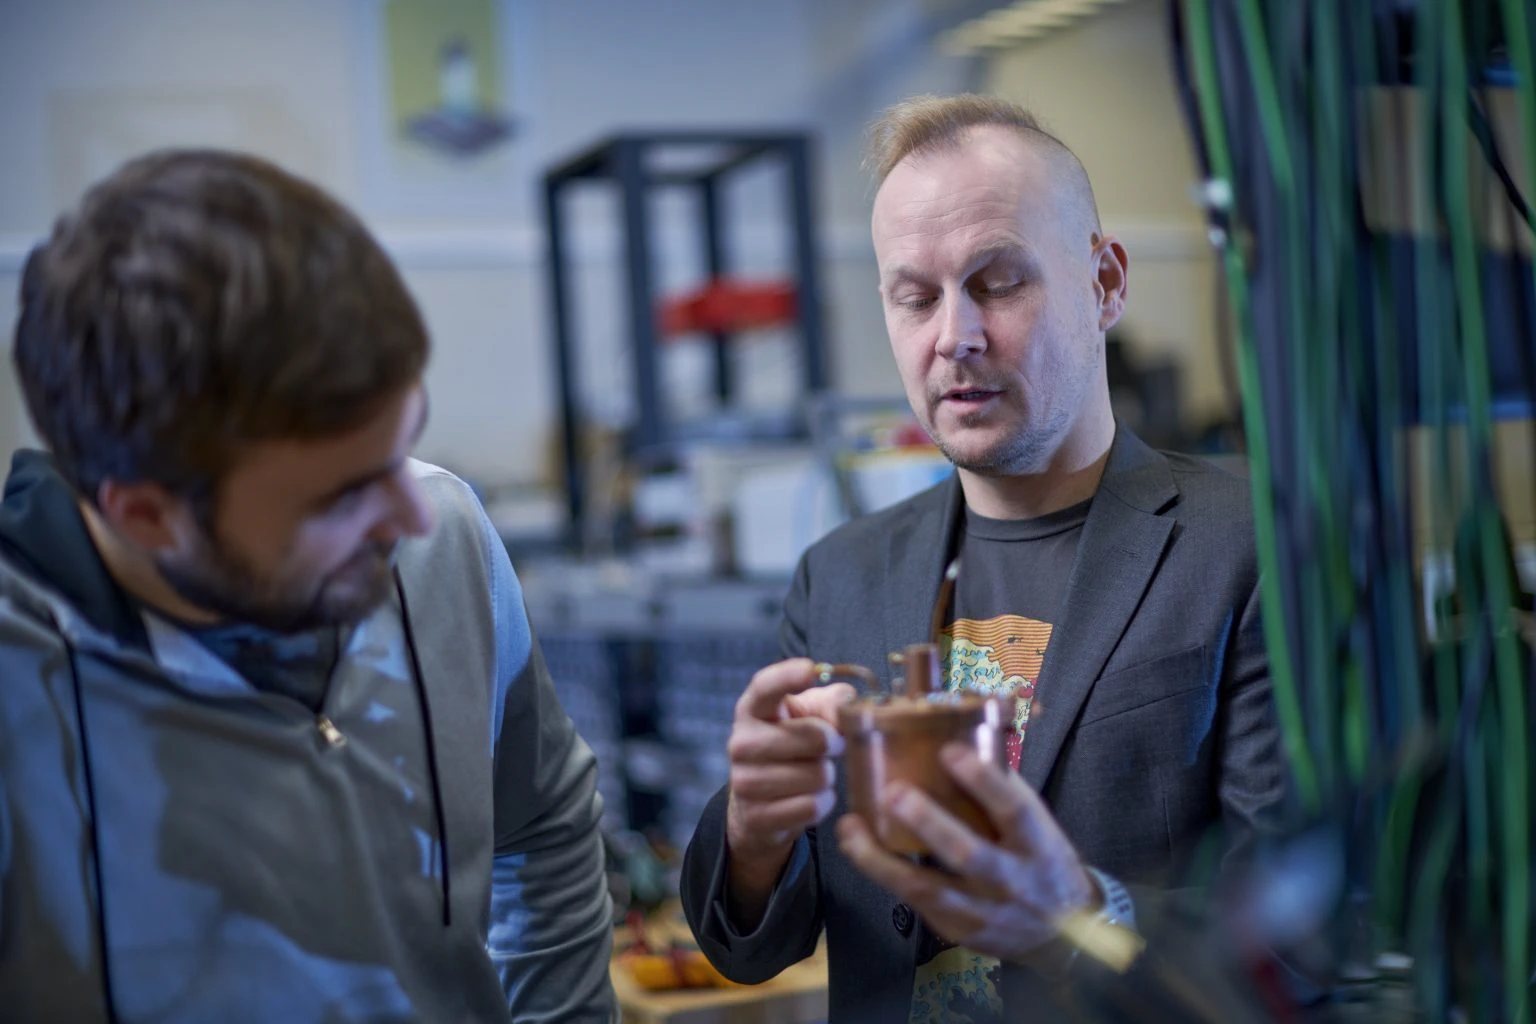 Johannes Pollanen stands in the center of the frame holding a copper-colored cylindrical apparatus for holding qubits with Joe Kitzman looking on from the left. The two stand in a laboratory space with shelving and equipment in the background. Blue and green cables run down the right side of the photograph in the foreground.